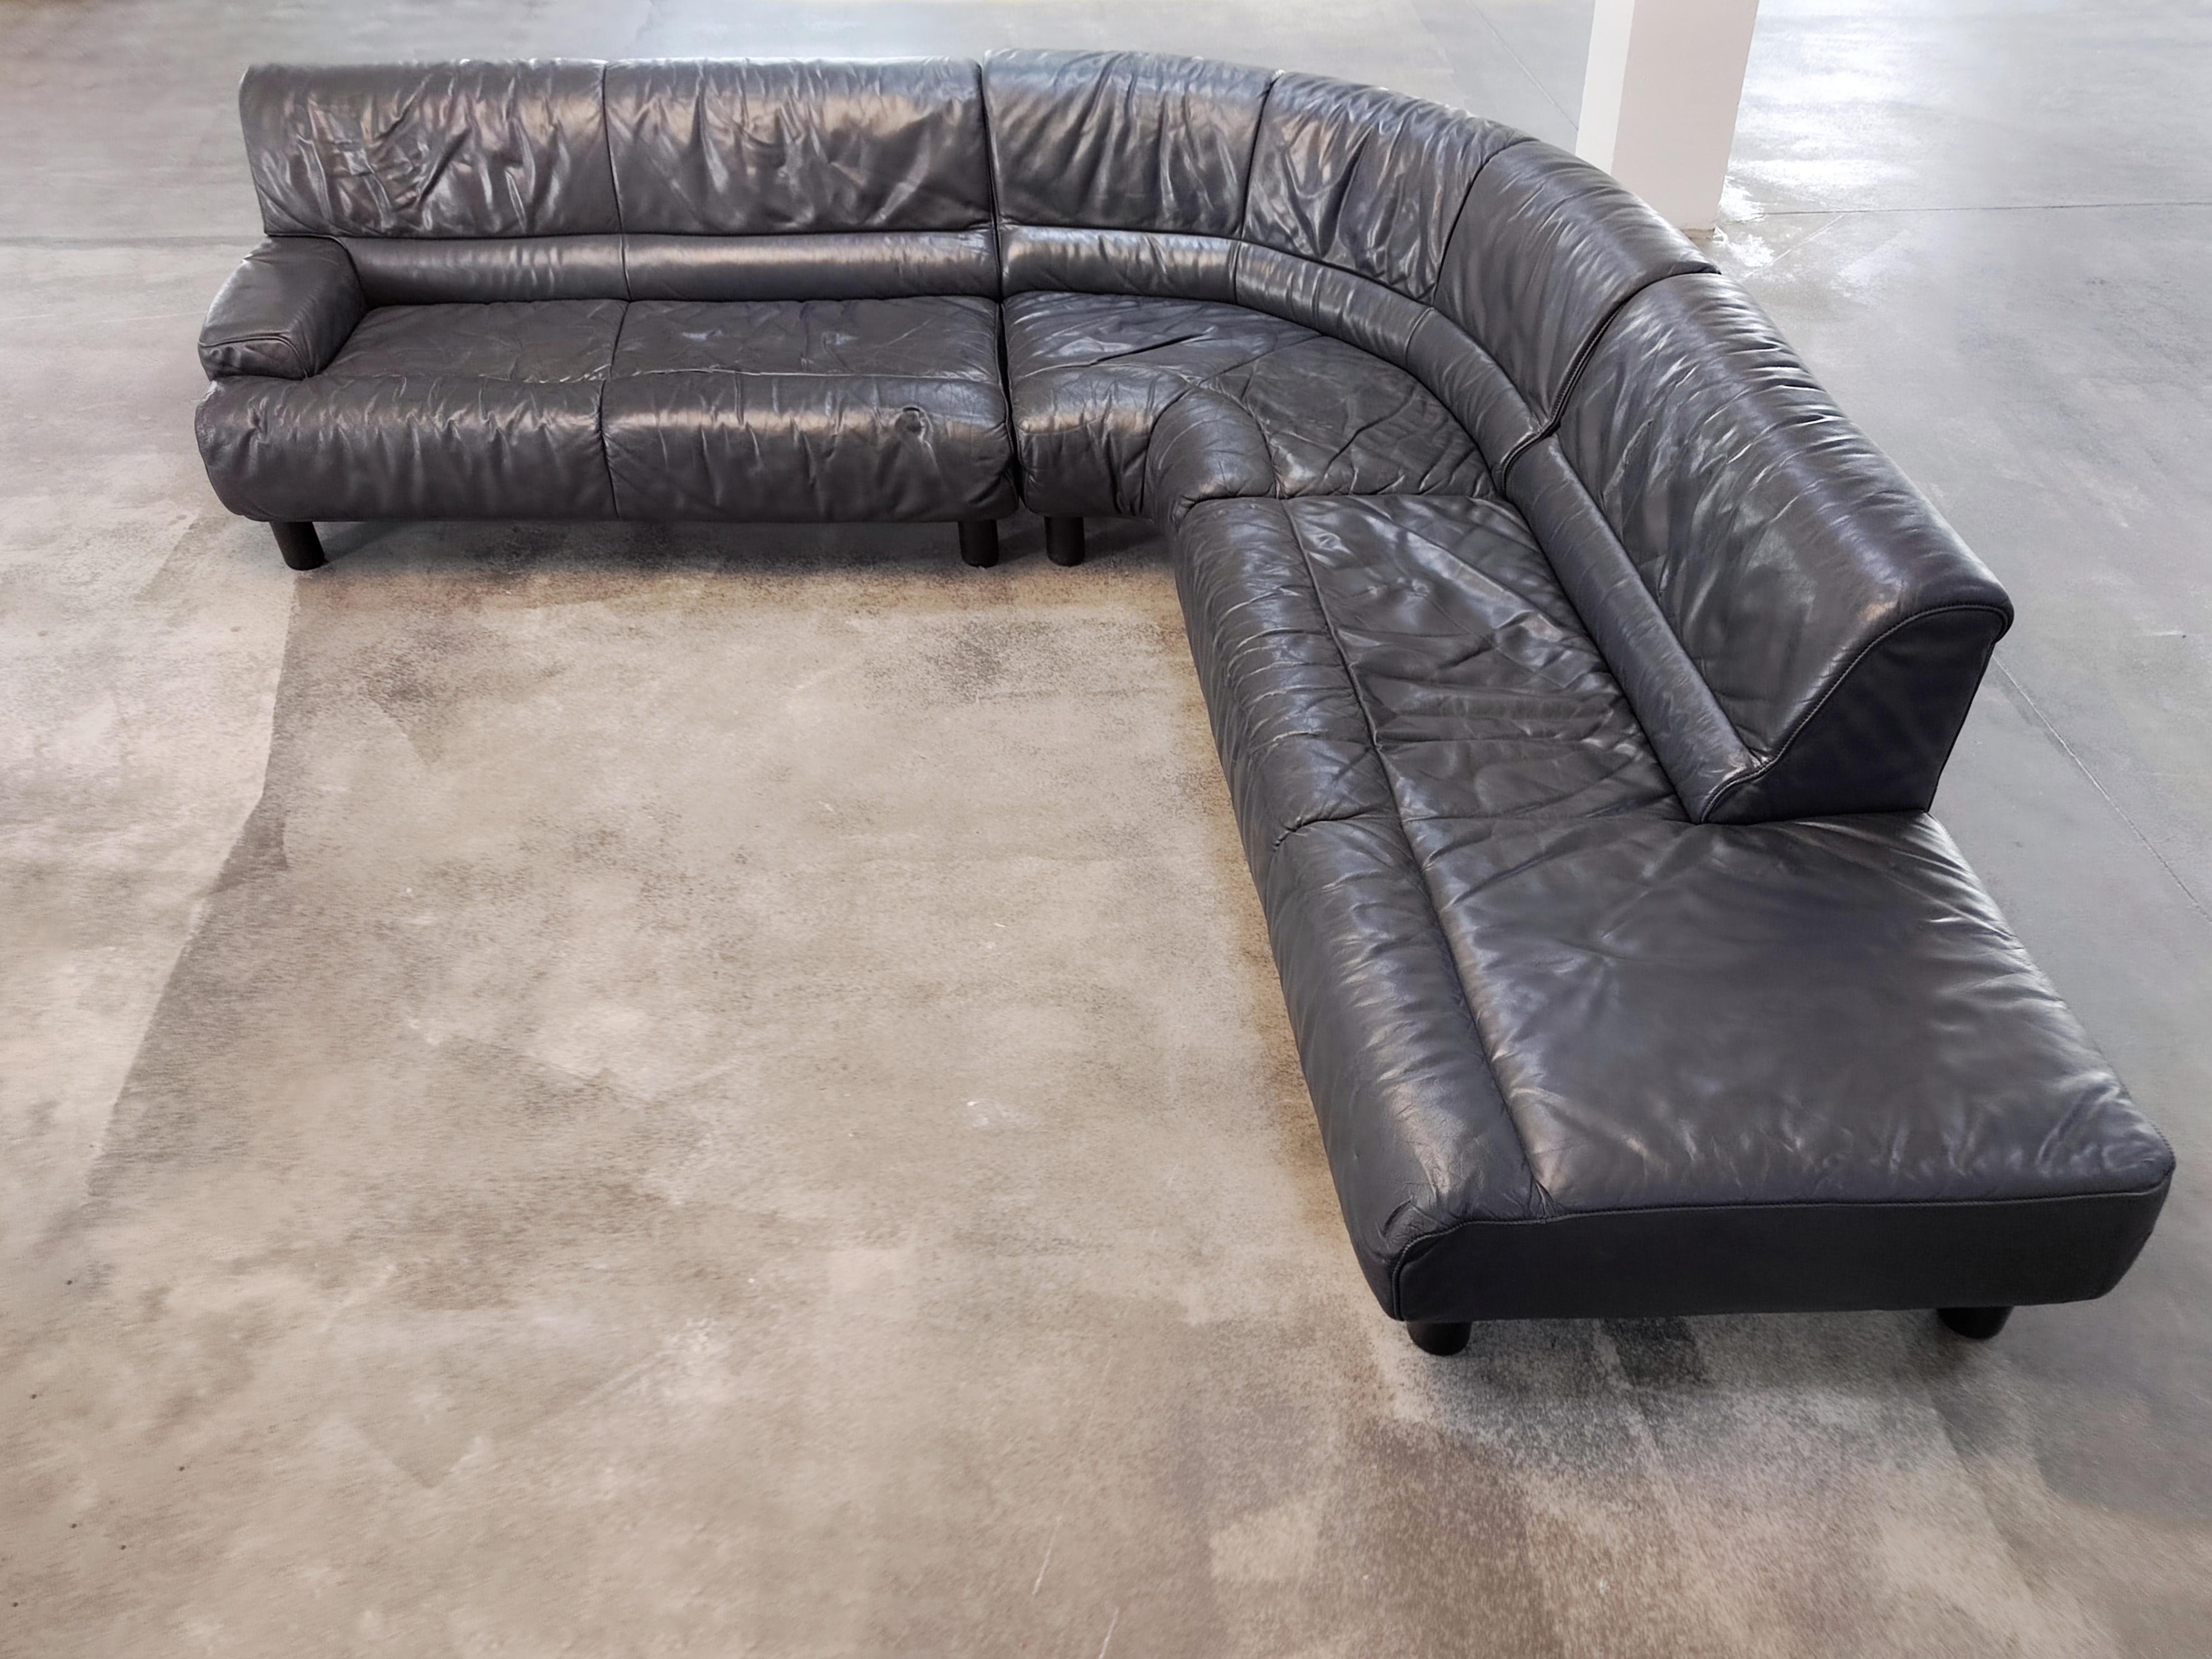 Sectional Anthracite Gray Leather Sofa DS-18 by De Sede, Switzerland 1980s In Good Condition For Sale In Beograd, RS